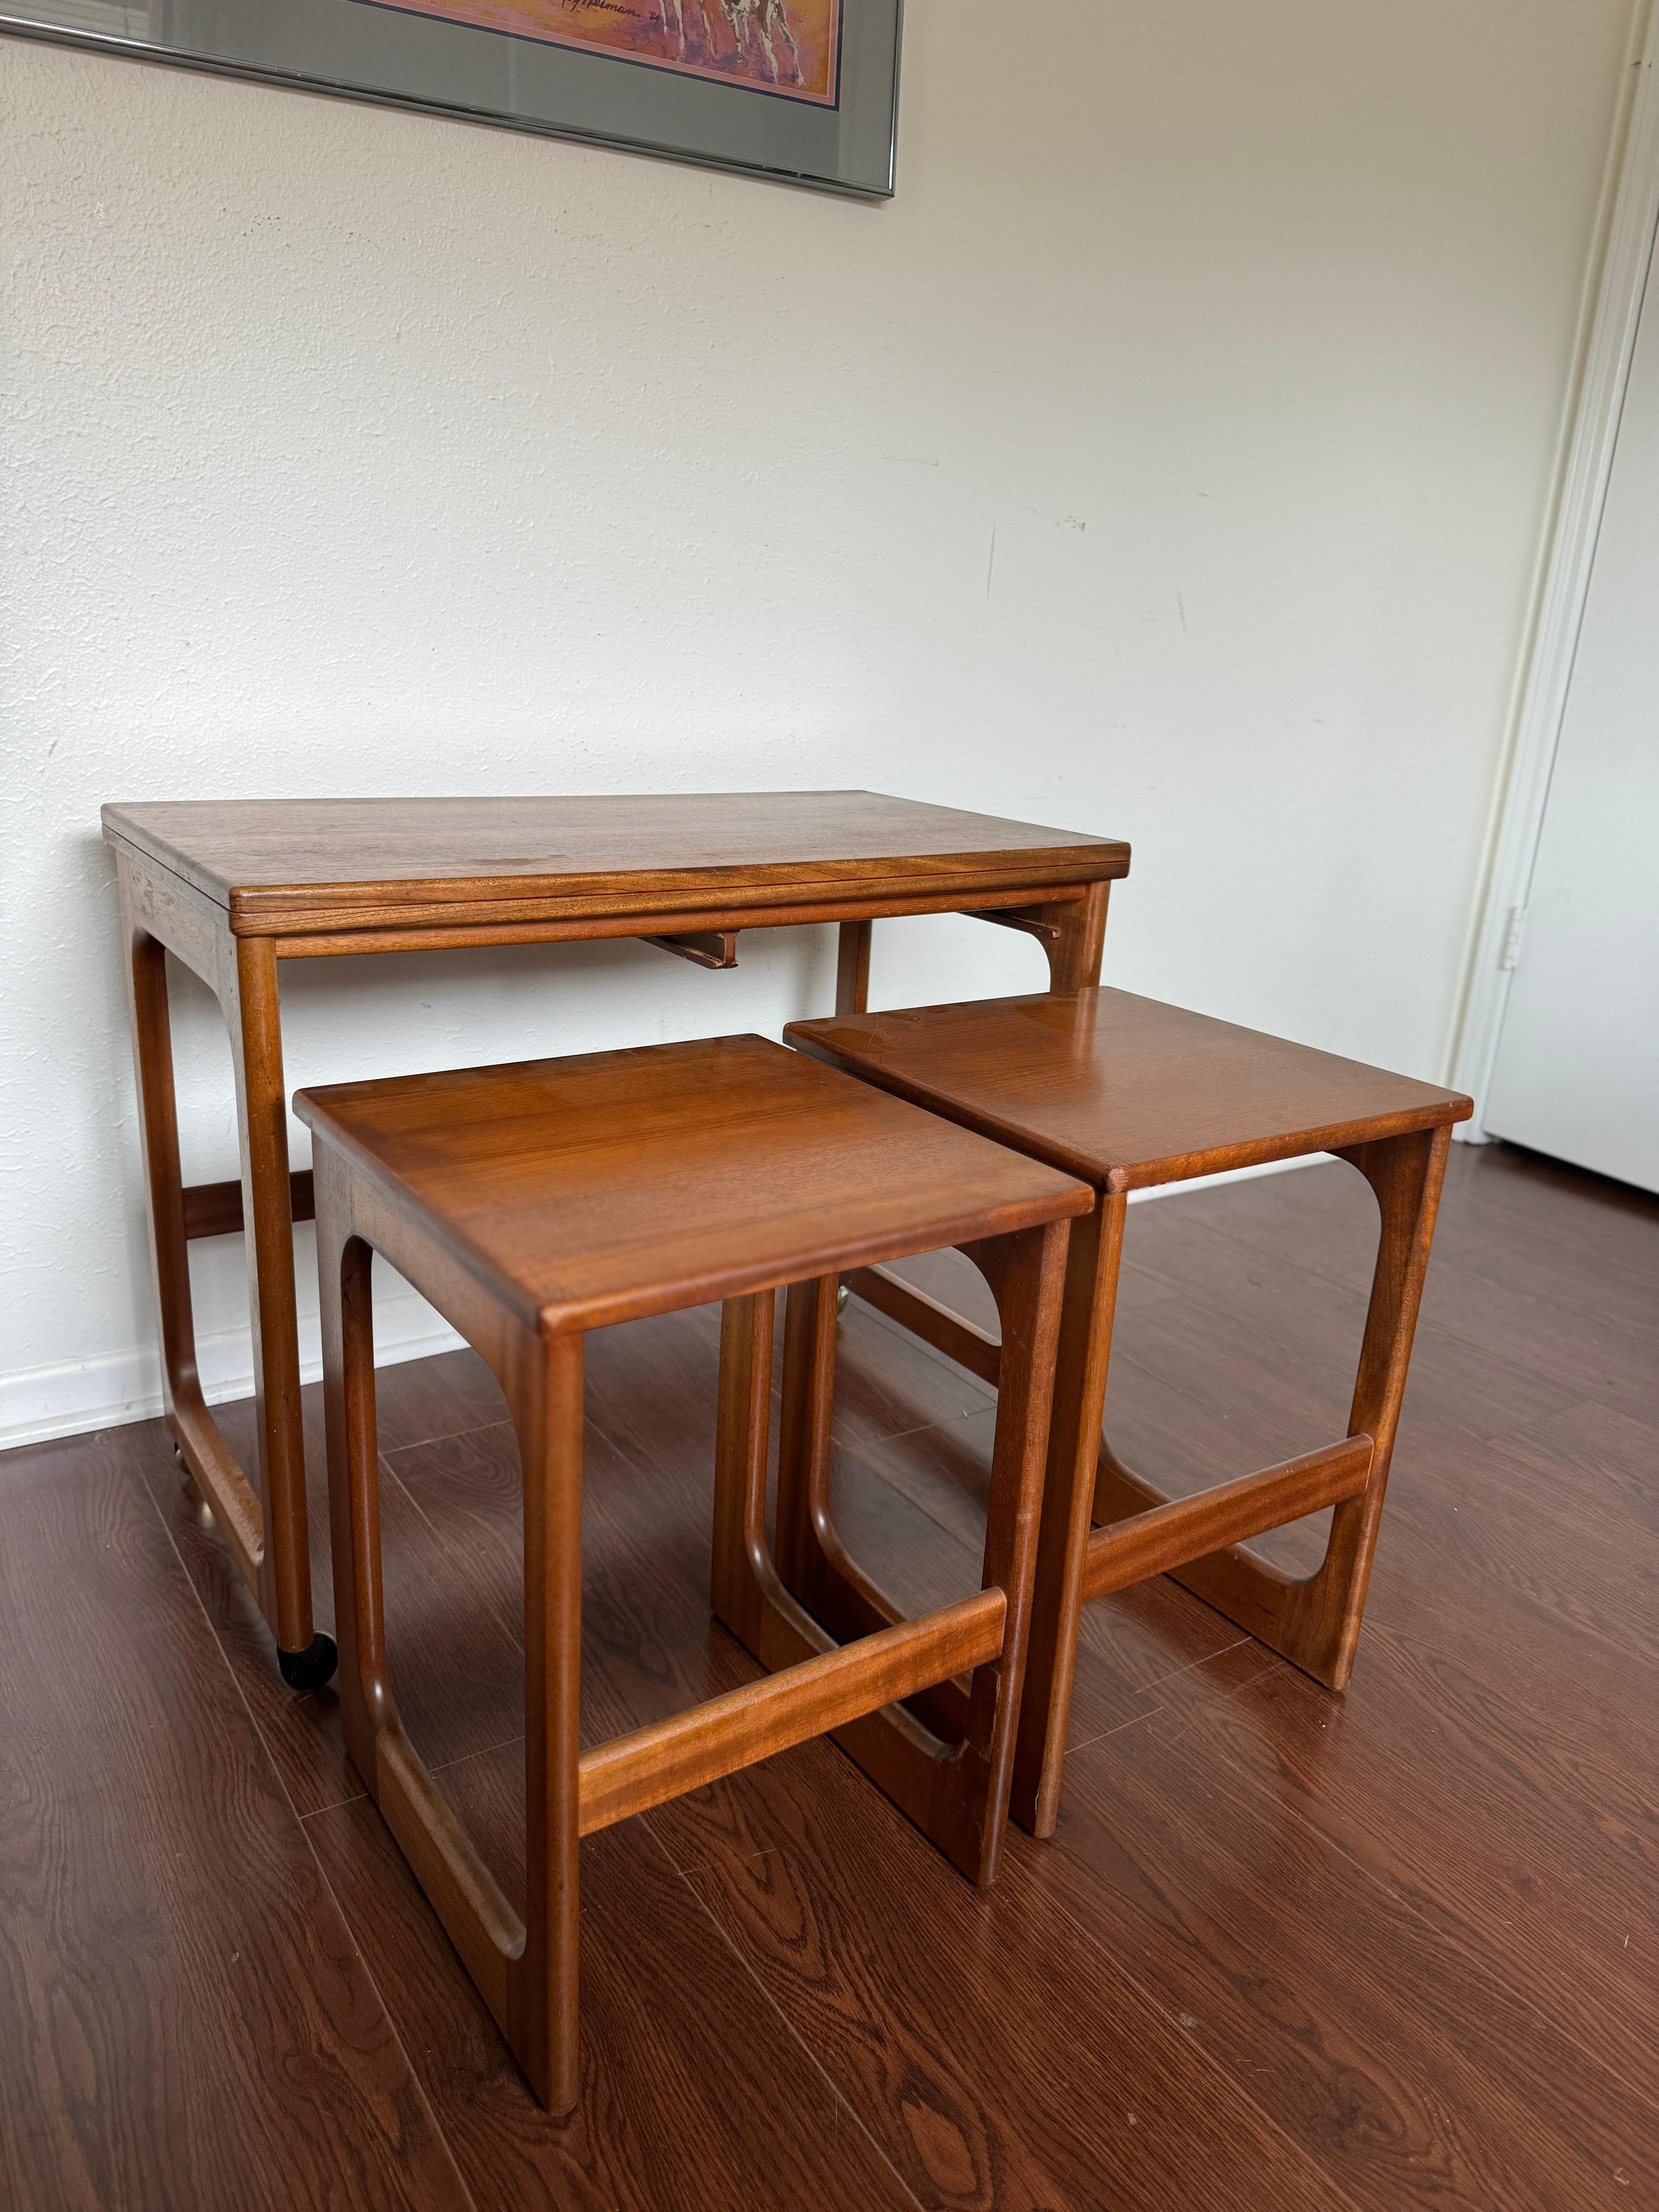 Multifunctional mid century extendable table made of teak by McIntosh, circa 1960s. Very pratical nesting table with castors. Can be used as a coffee table or game table if you use the smaller tables as stools. In good original condition and